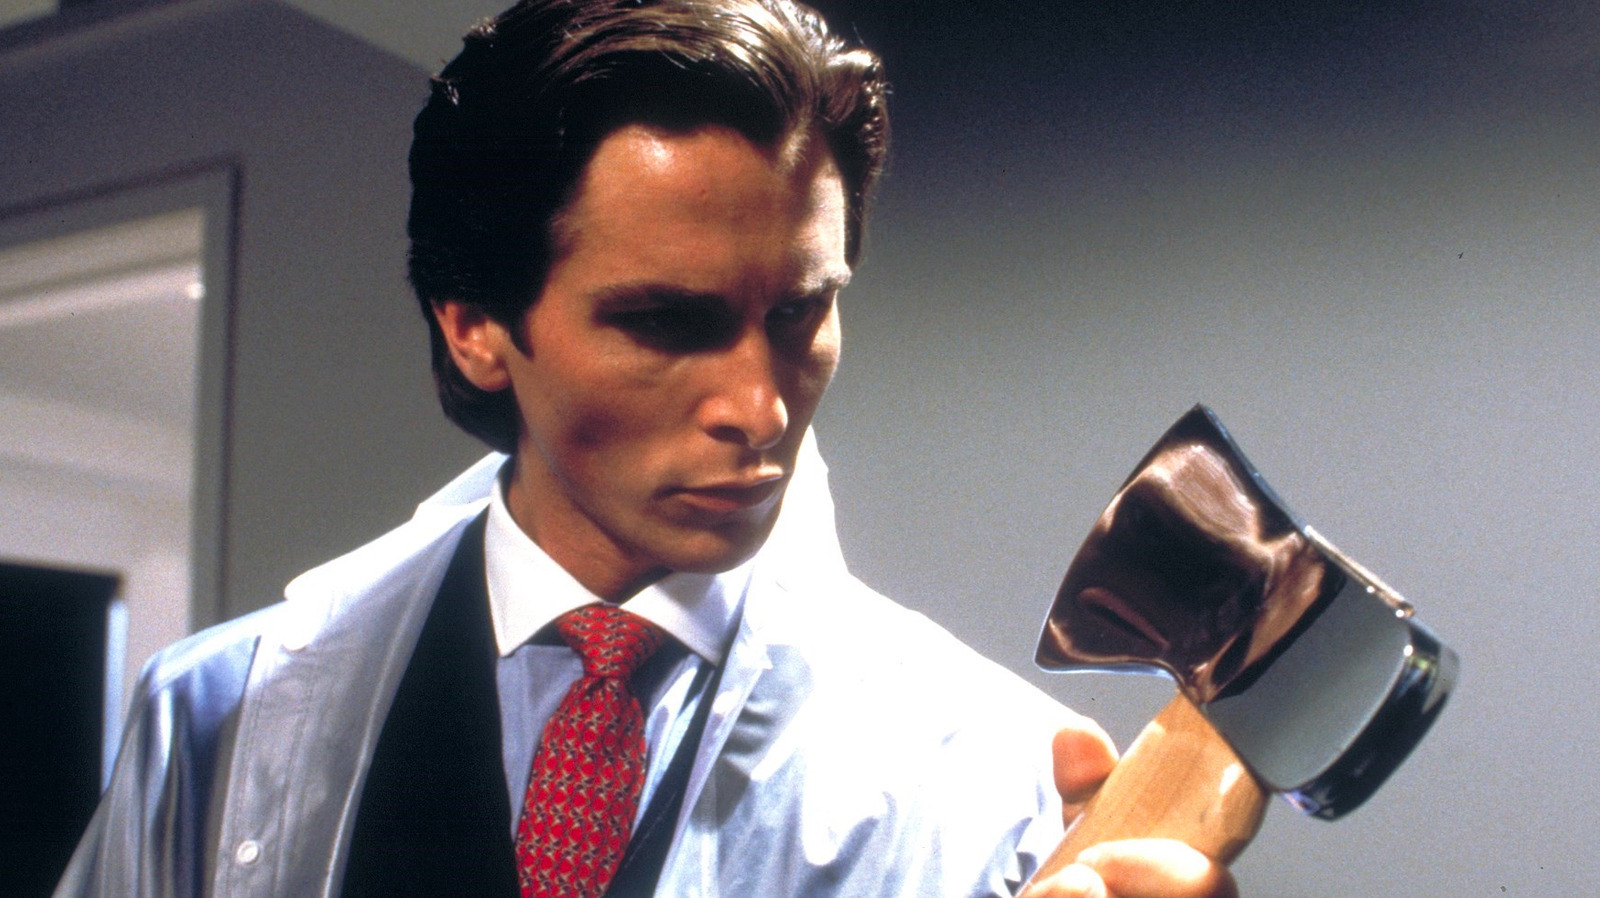 In Hindsight, an 'American Psycho' Looks a Lot Like Us - The New York Times